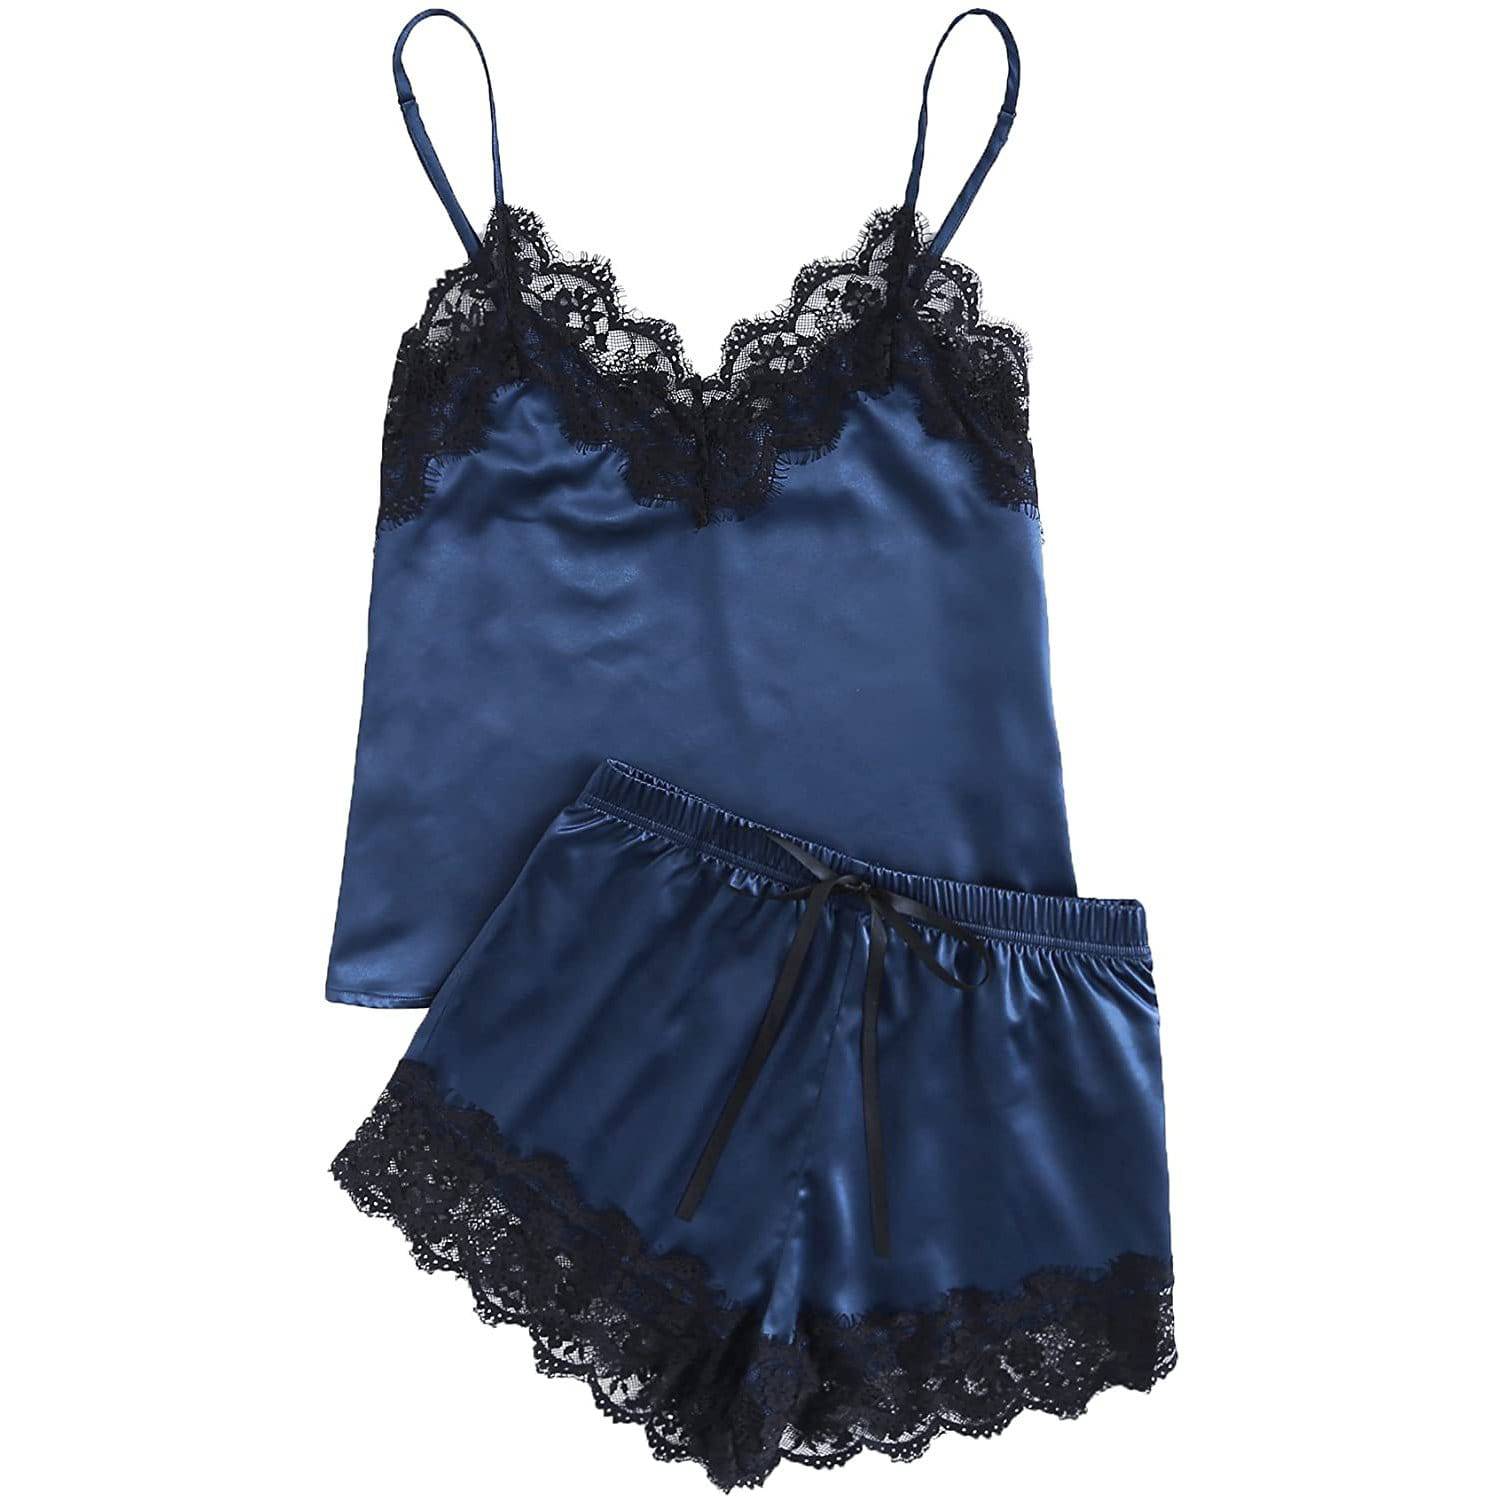 Swan Pocket Blue Silk Nightwear with Lace Trim Shorts in Top and